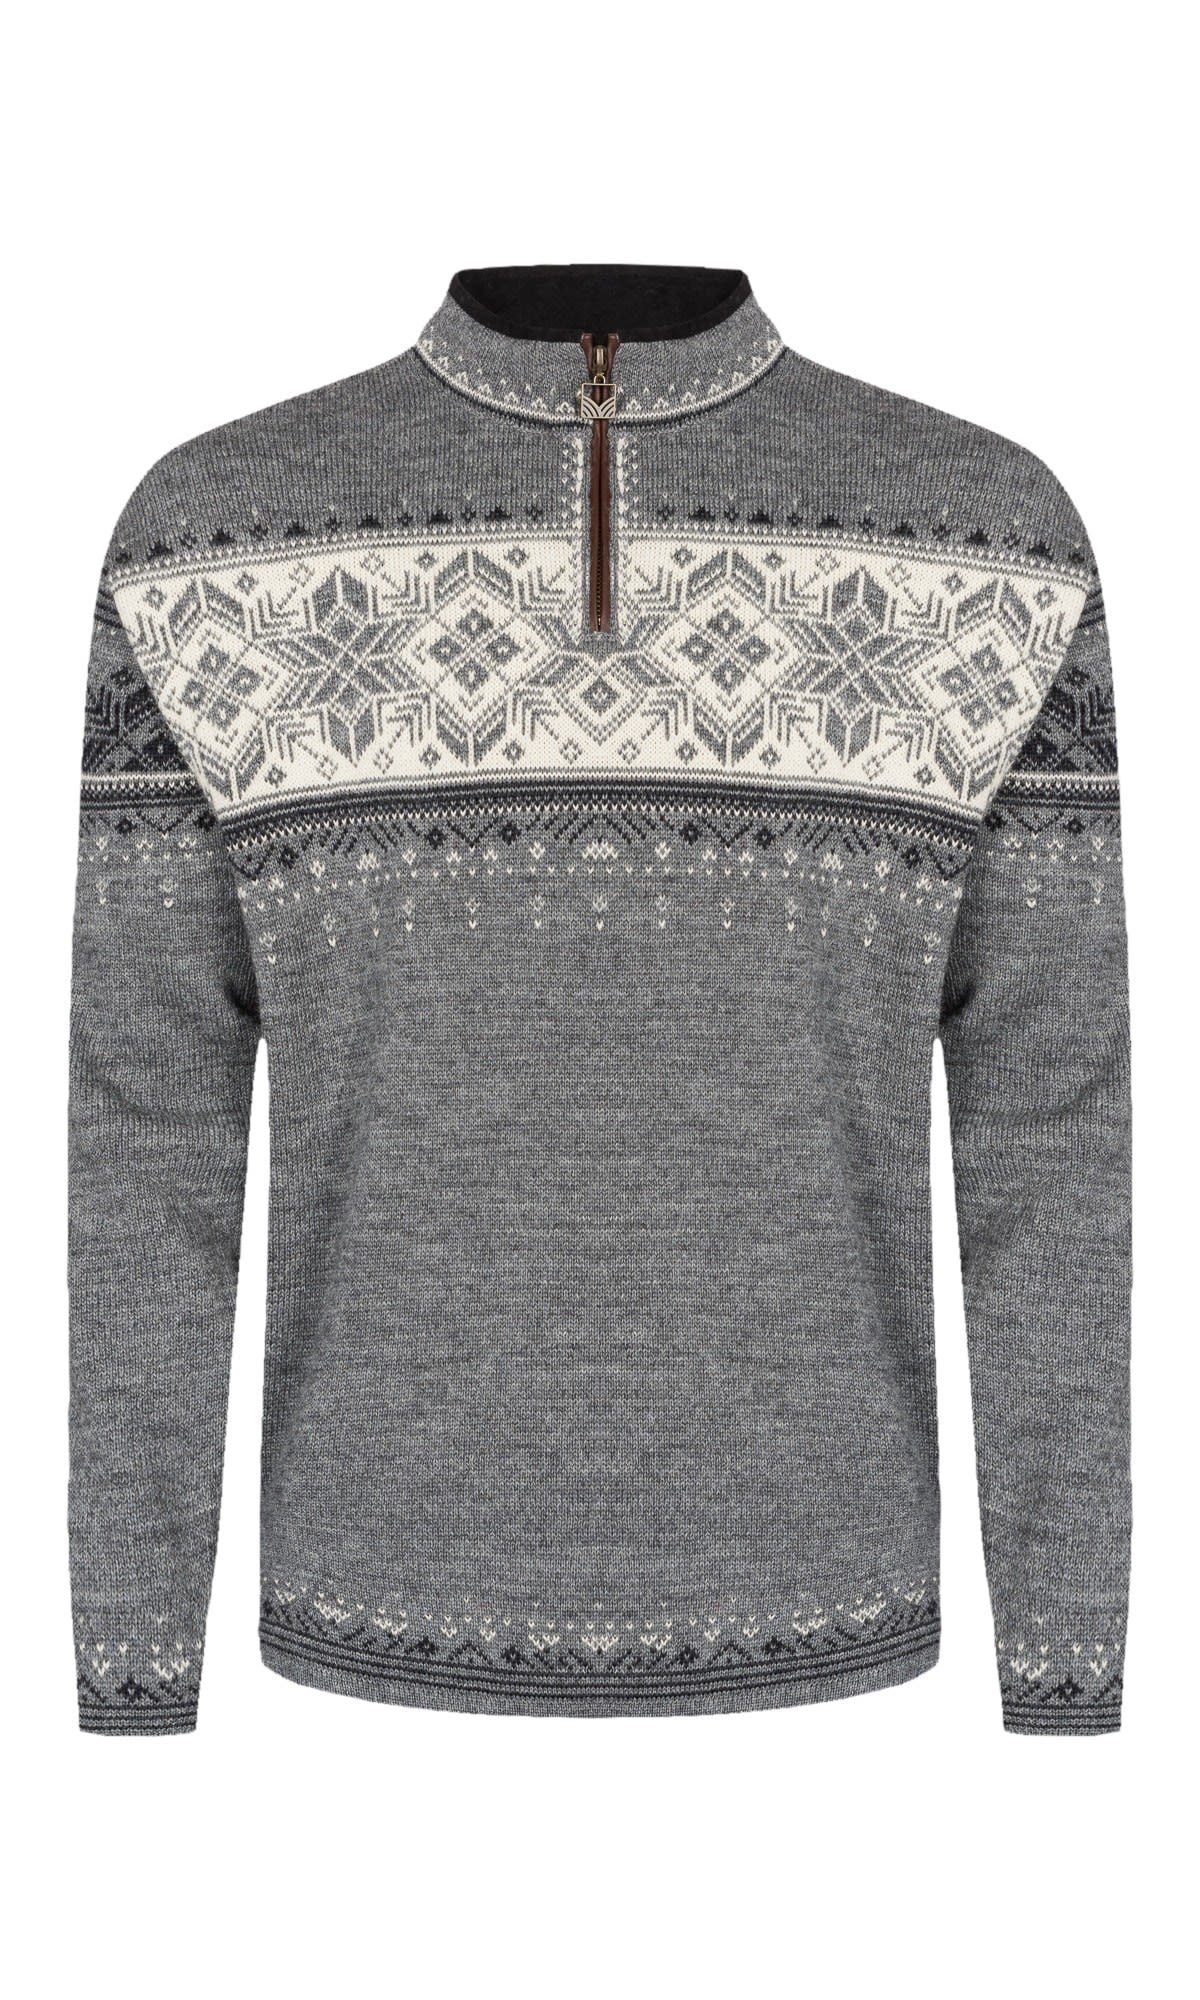 Dale Blyfjell Norway of Offwhite Smoke Dark Of Norway Longpullover - Grey Freizeitpullover - Sweater Dale